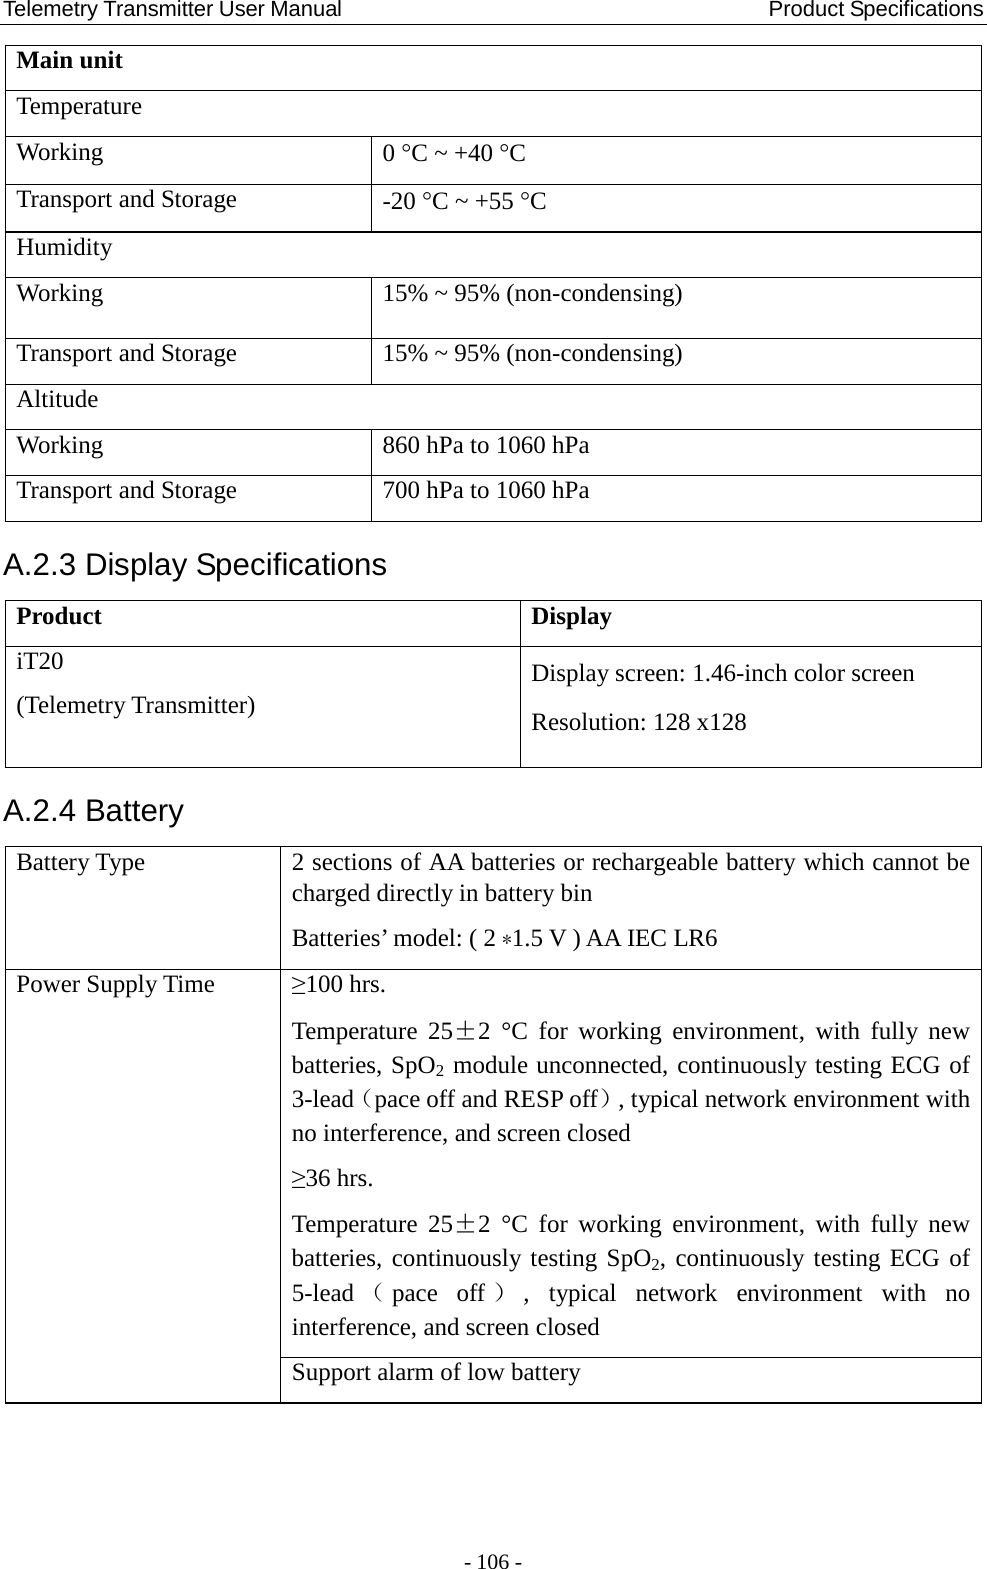 Telemetry Transmitter User Manual                                       Product Specifications   Main unit Temperature Working 0 °C ~ +40 °C Transport and Storage -20 °C ~ +55 °C Humidity Working 15% ~ 95% (non-condensing) Transport and Storage 15% ~ 95% (non-condensing) Altitude Working 860 hPa to 1060 hPa Transport and Storage 700 hPa to 1060 hPa A.2.3 Display Specifications Product Display iT20 (Telemetry Transmitter) Display screen: 1.46-inch color screen Resolution: 128 x128 A.2.4 Battery Battery Type 2 sections of AA batteries or rechargeable battery which cannot be charged directly in battery bin Batteries’ model: ( 2 *1.5 V ) AA IEC LR6 Power Supply Time ≥100 hrs.   Temperature  25±2  °C  for working environment, with fully new batteries, SpO2 module unconnected, continuously testing ECG of 3-lead（pace off and RESP off）, typical network environment with no interference, and screen closed ≥36 hrs.   Temperature  25±2  °C  for working environment,  with  fully new batteries, continuously testing SpO2, continuously testing ECG of 5-lead （pace off ）,  typical network environment with no interference, and screen closed Support alarm of low battery   - 106 - 